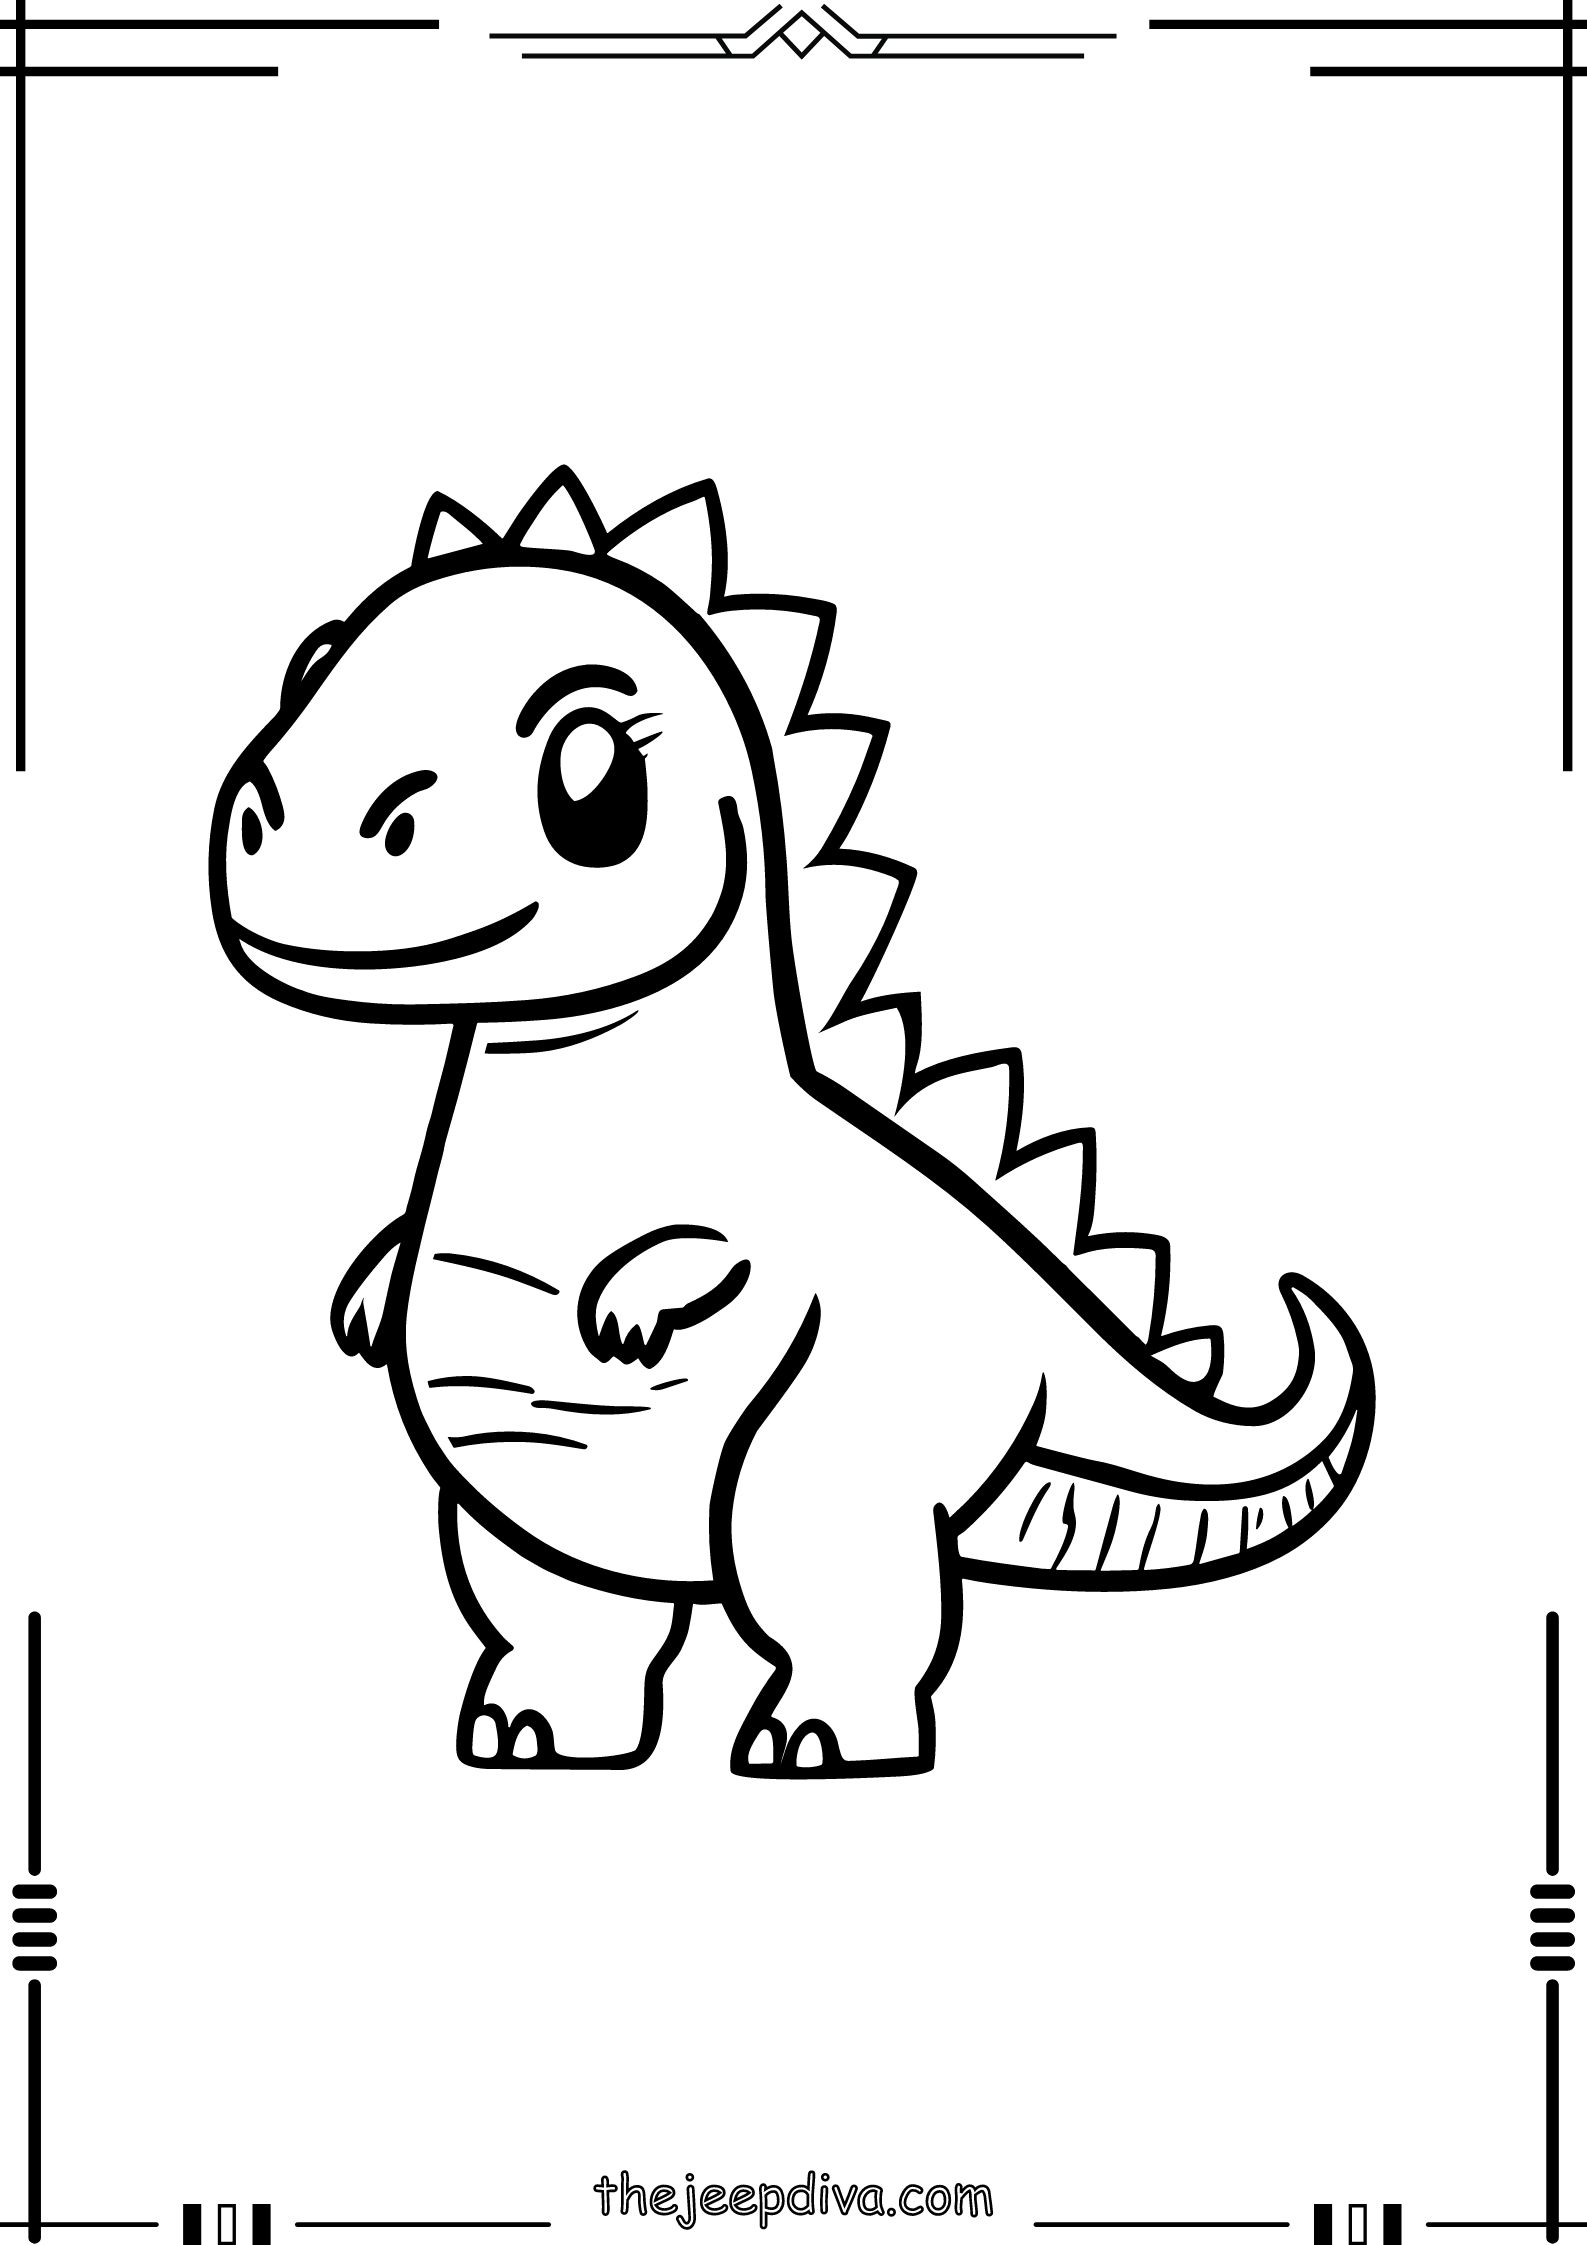 Dinosaur-Colouring-Pages-Easy-2